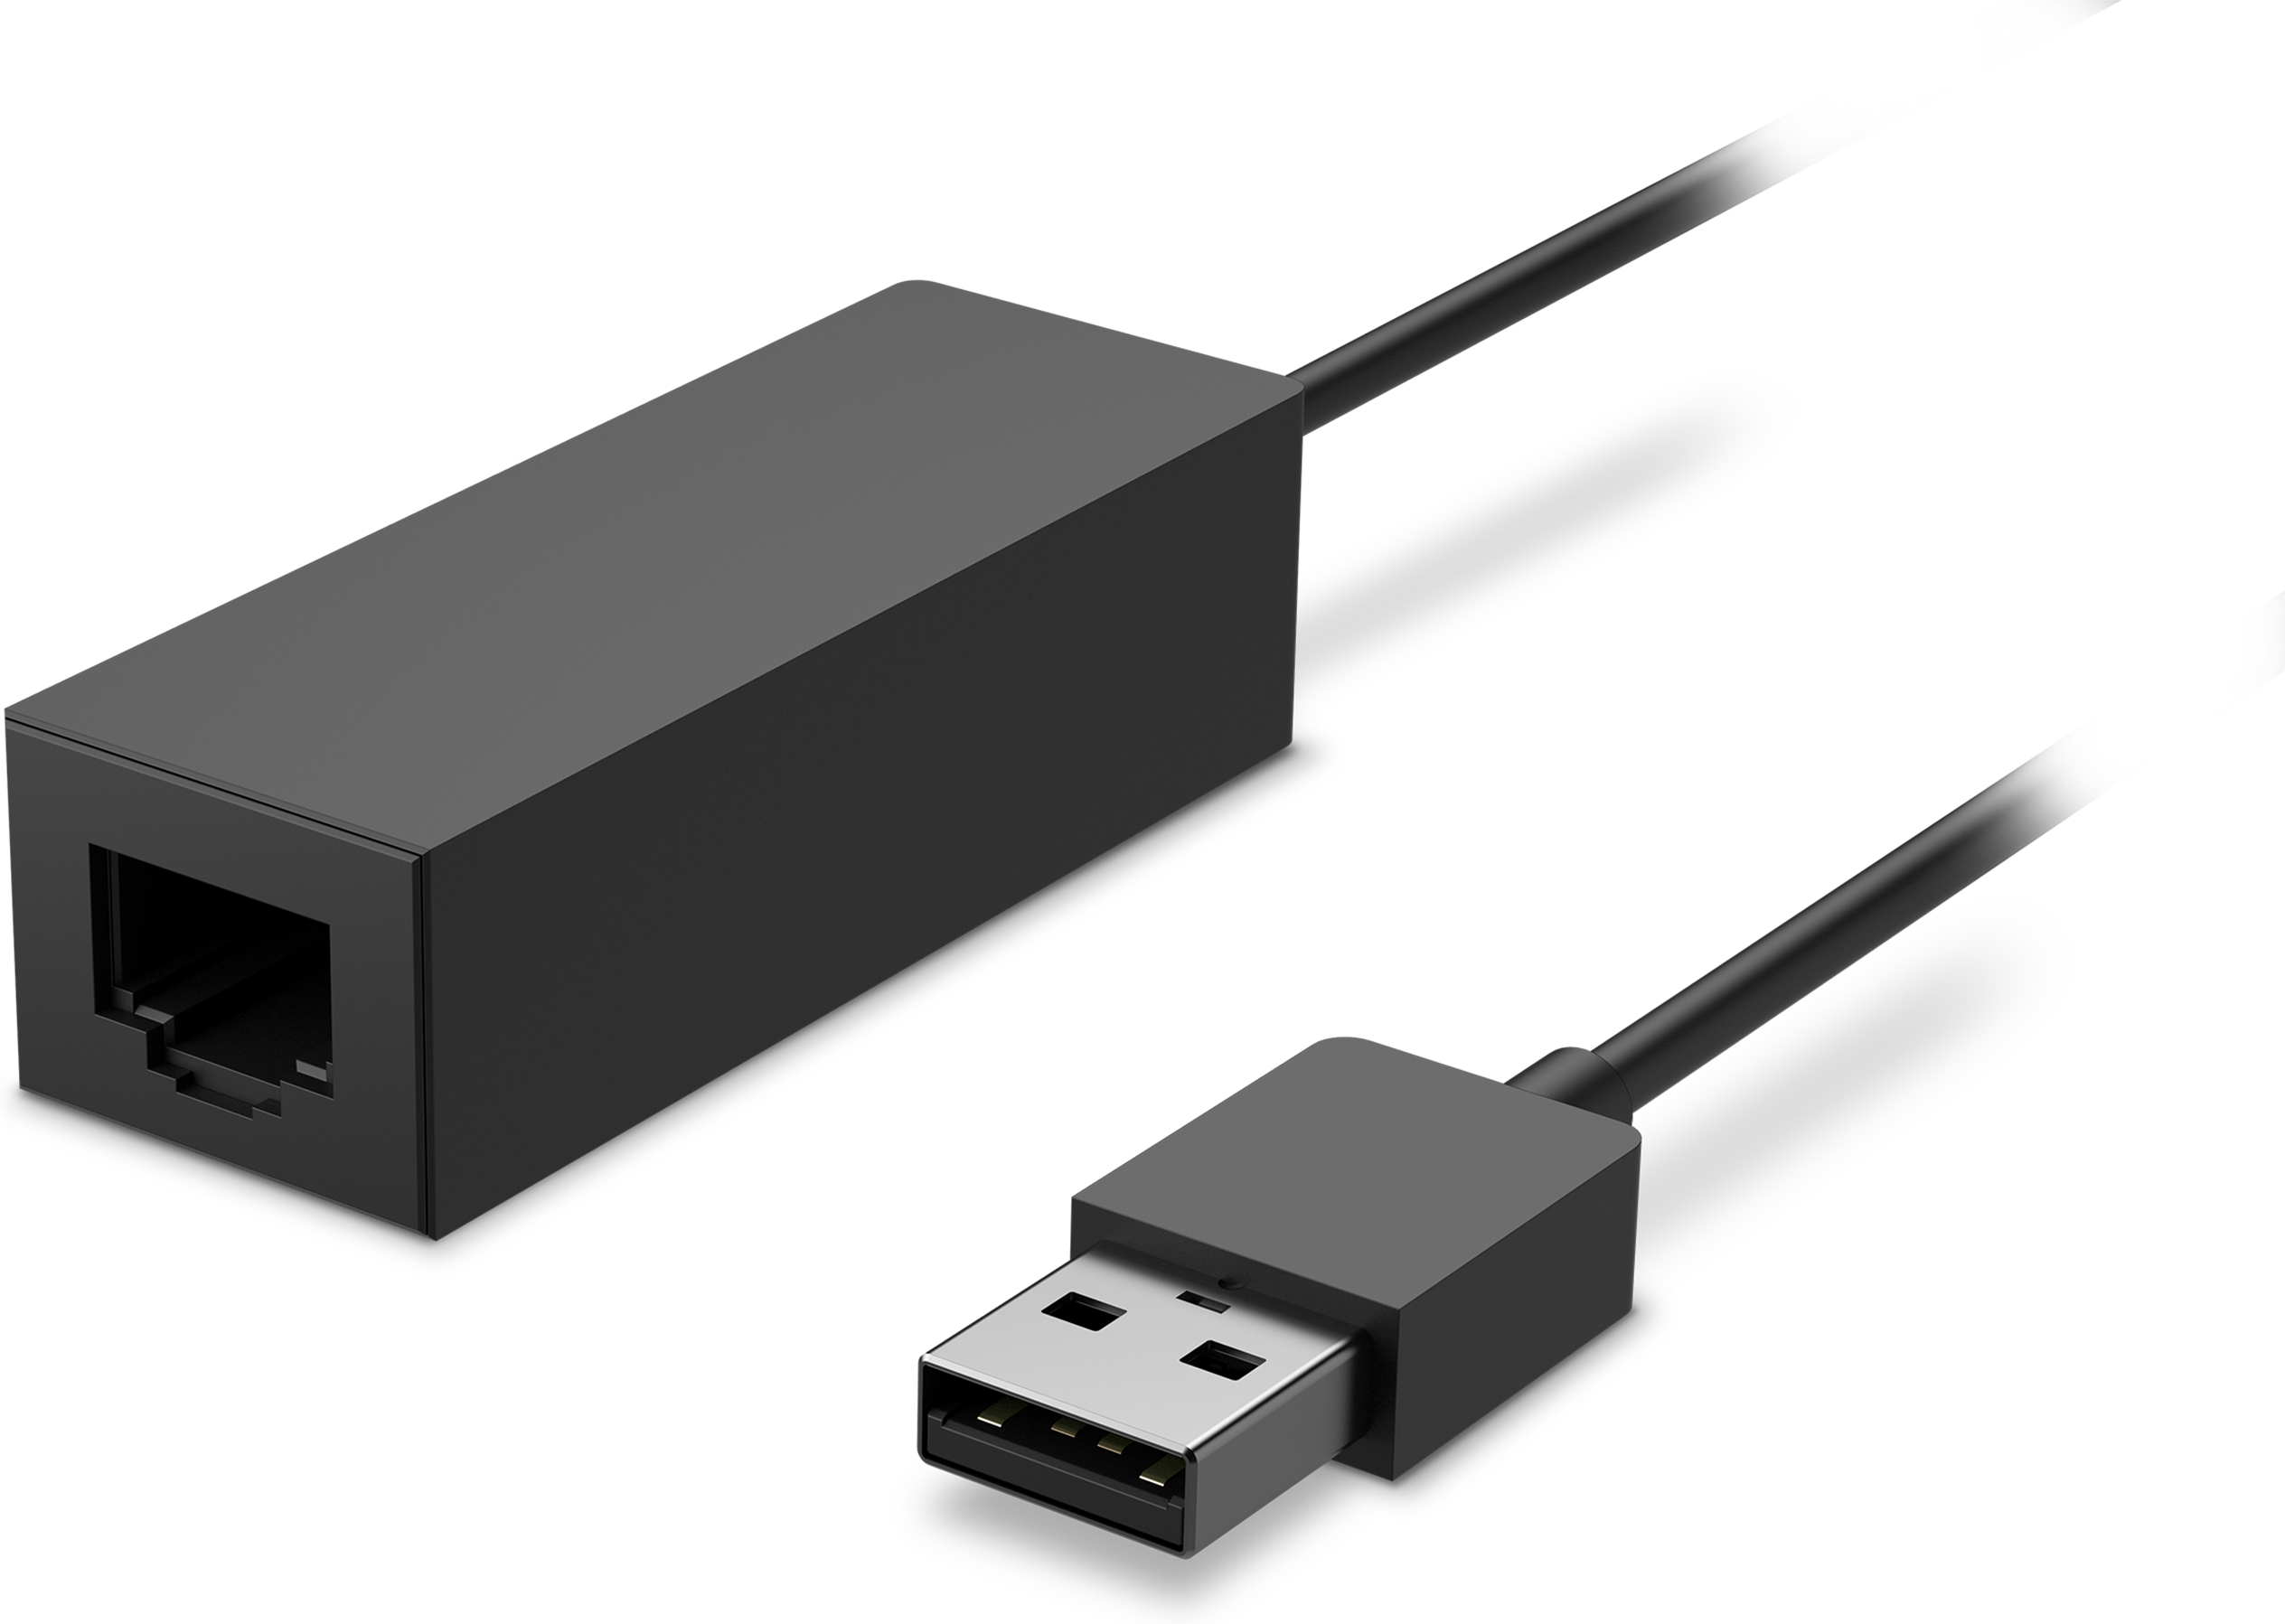 How To Use A Generic Usb Ethernet Adapter Rd9700 On Mac Os X Technouz